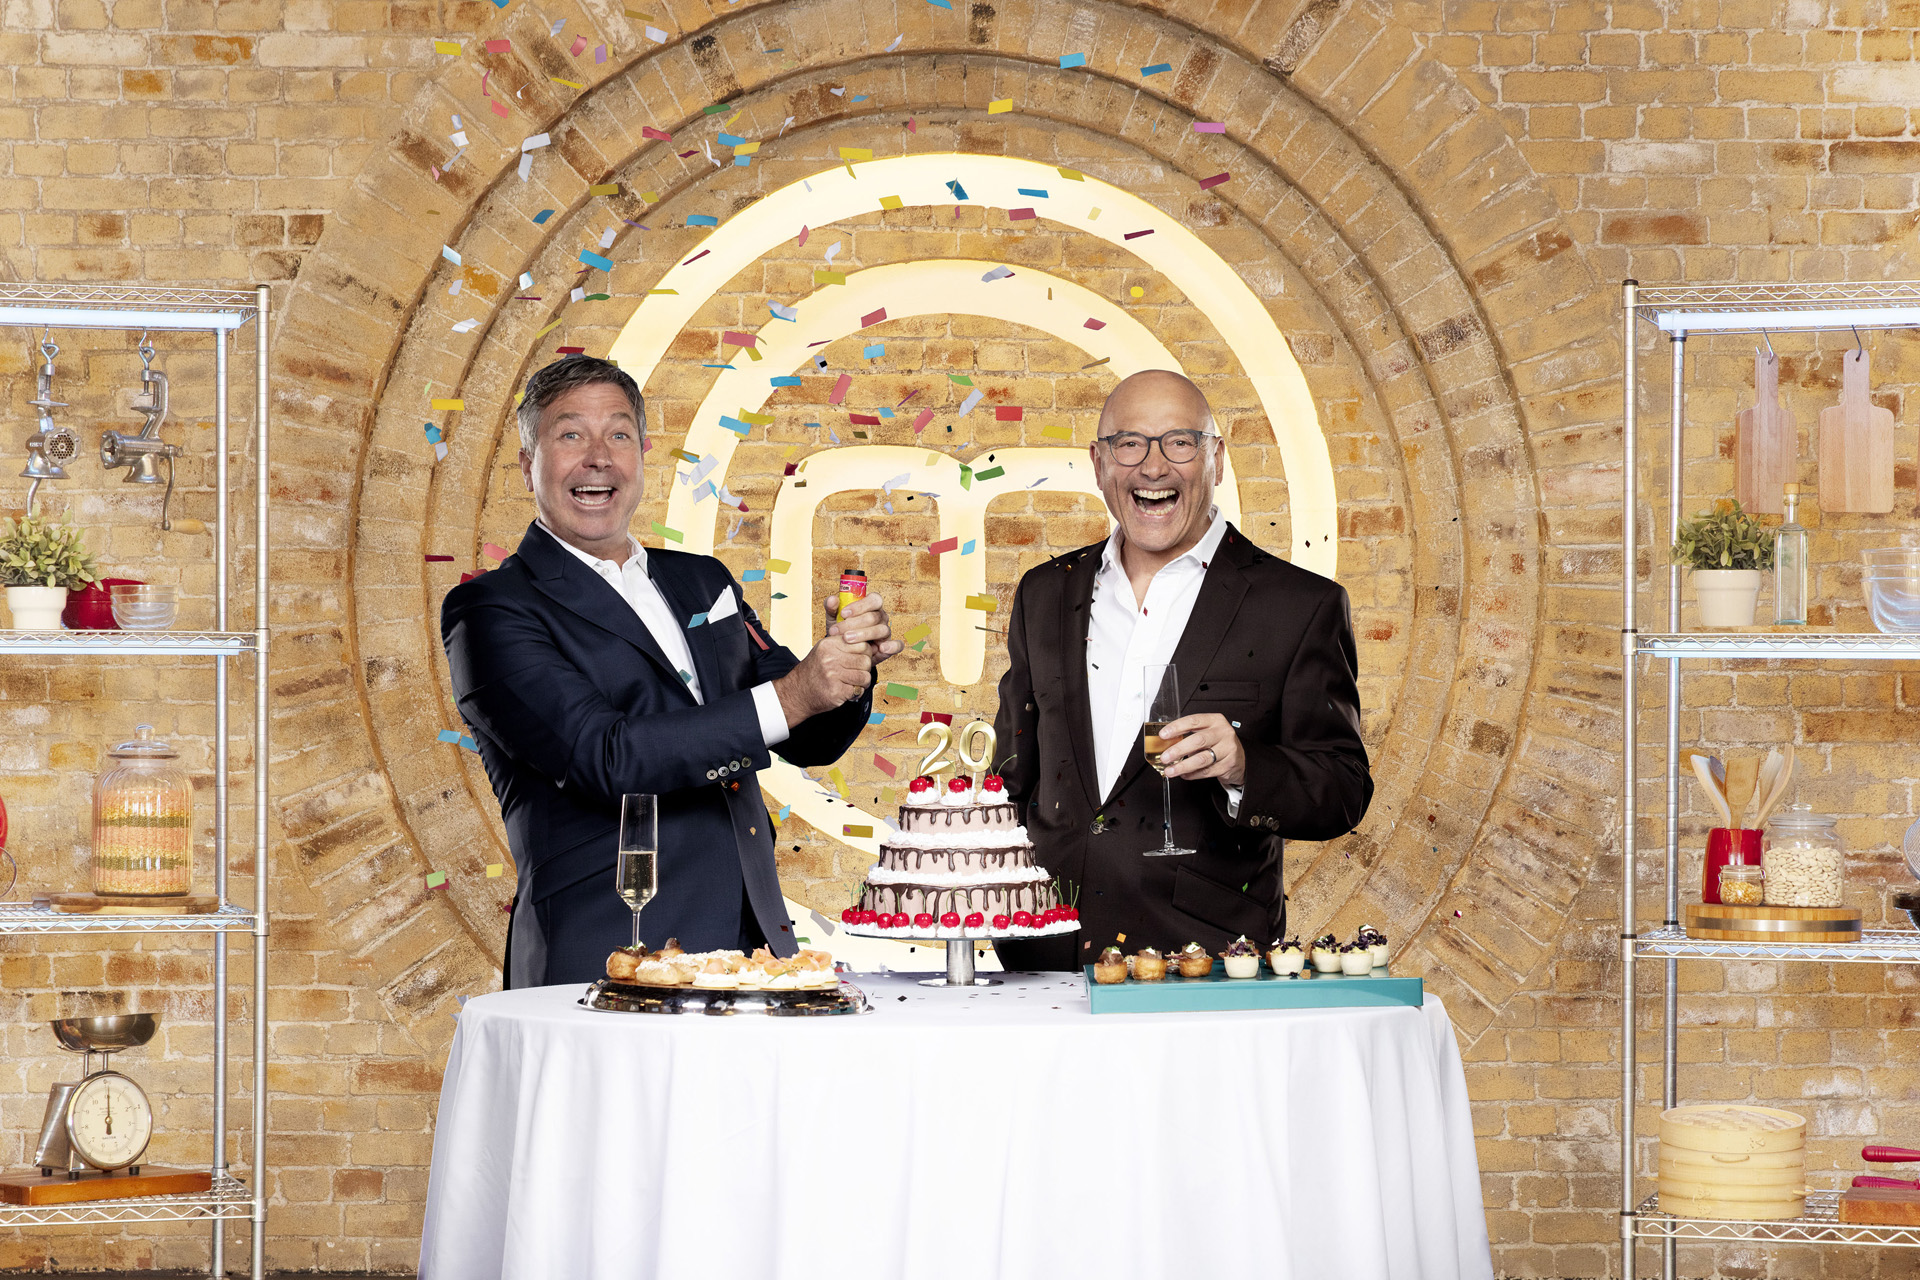 Here's What To Expect On MasterChef This Week